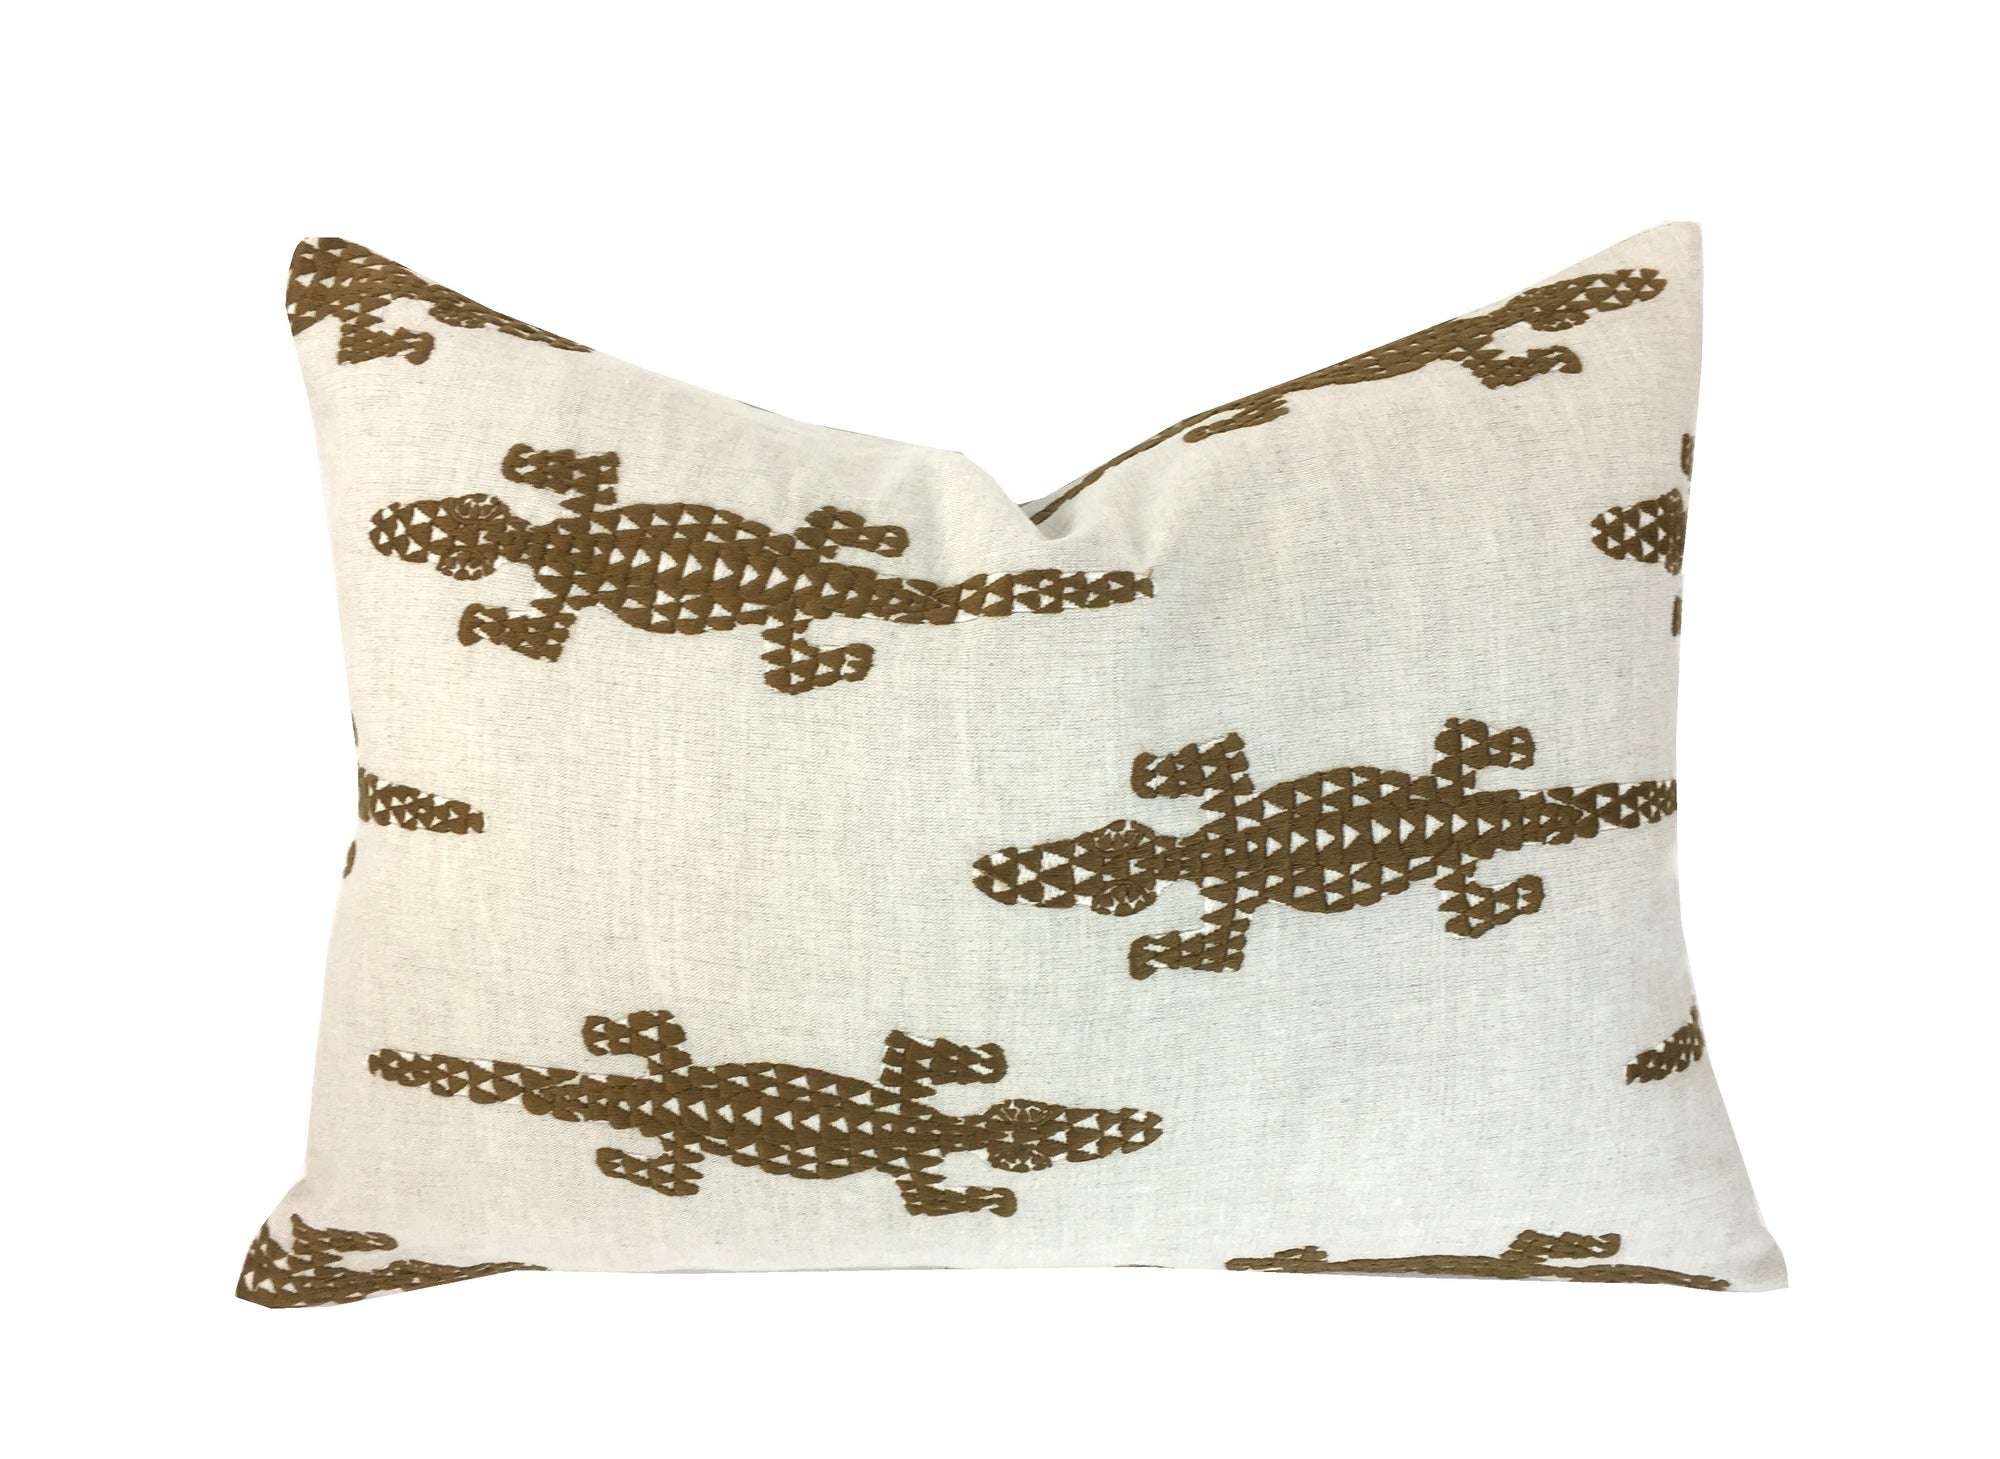 BACKORDER | Baracoa Brown Embroidery Pillow Cover | Lumbar Sizes